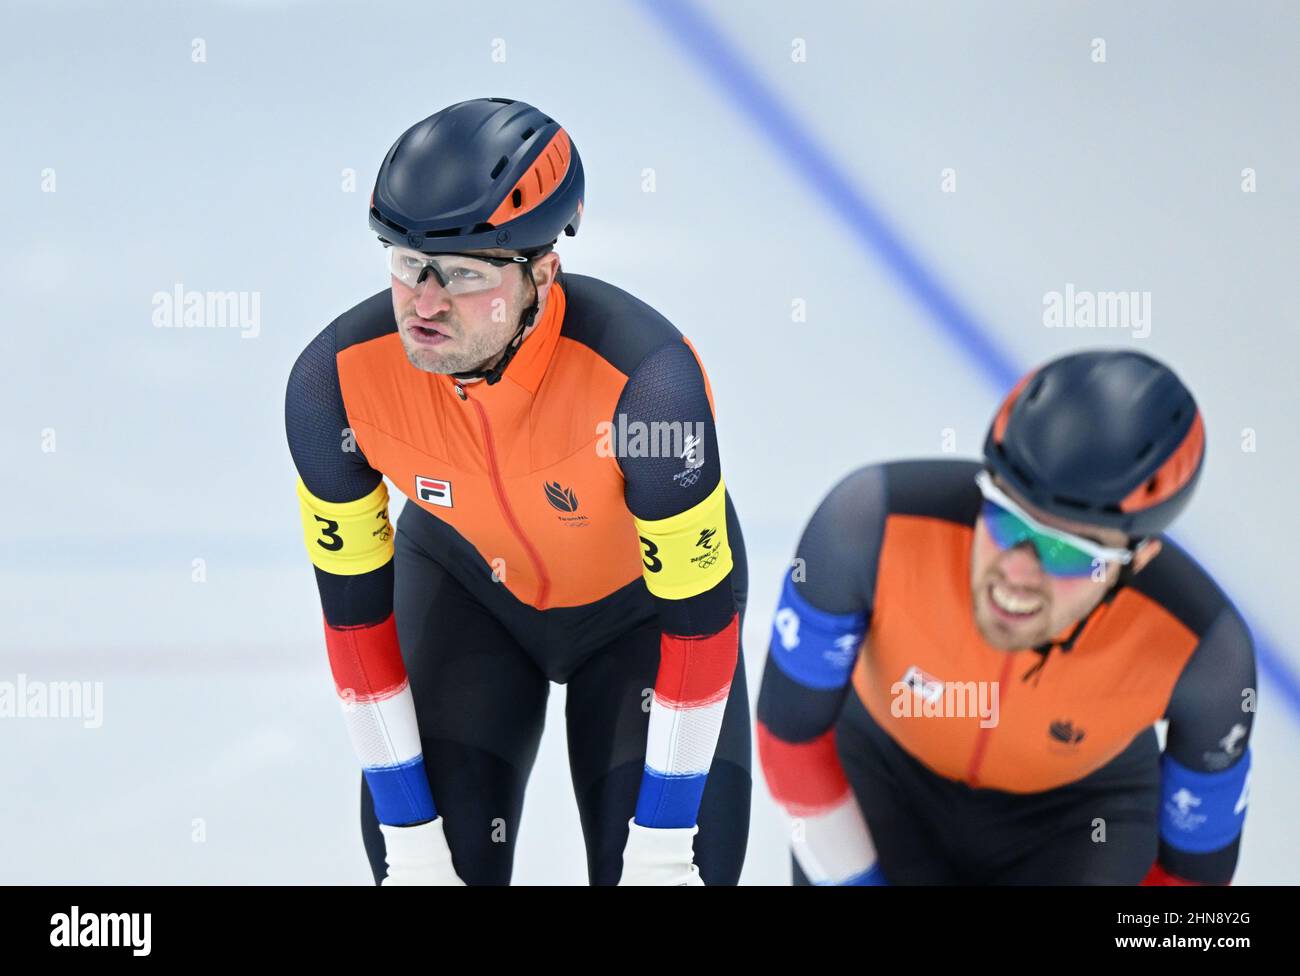 Beijing, China. 15th Feb, 2022. Sven Kramer (L) reacts after the speed skating men's team pursuit semifinals at the National Speed Skating Oval in Beijing, capital of China, Feb. 15, 2022. Credit: Wu Wei/Xinhua/Alamy Live News Stock Photo